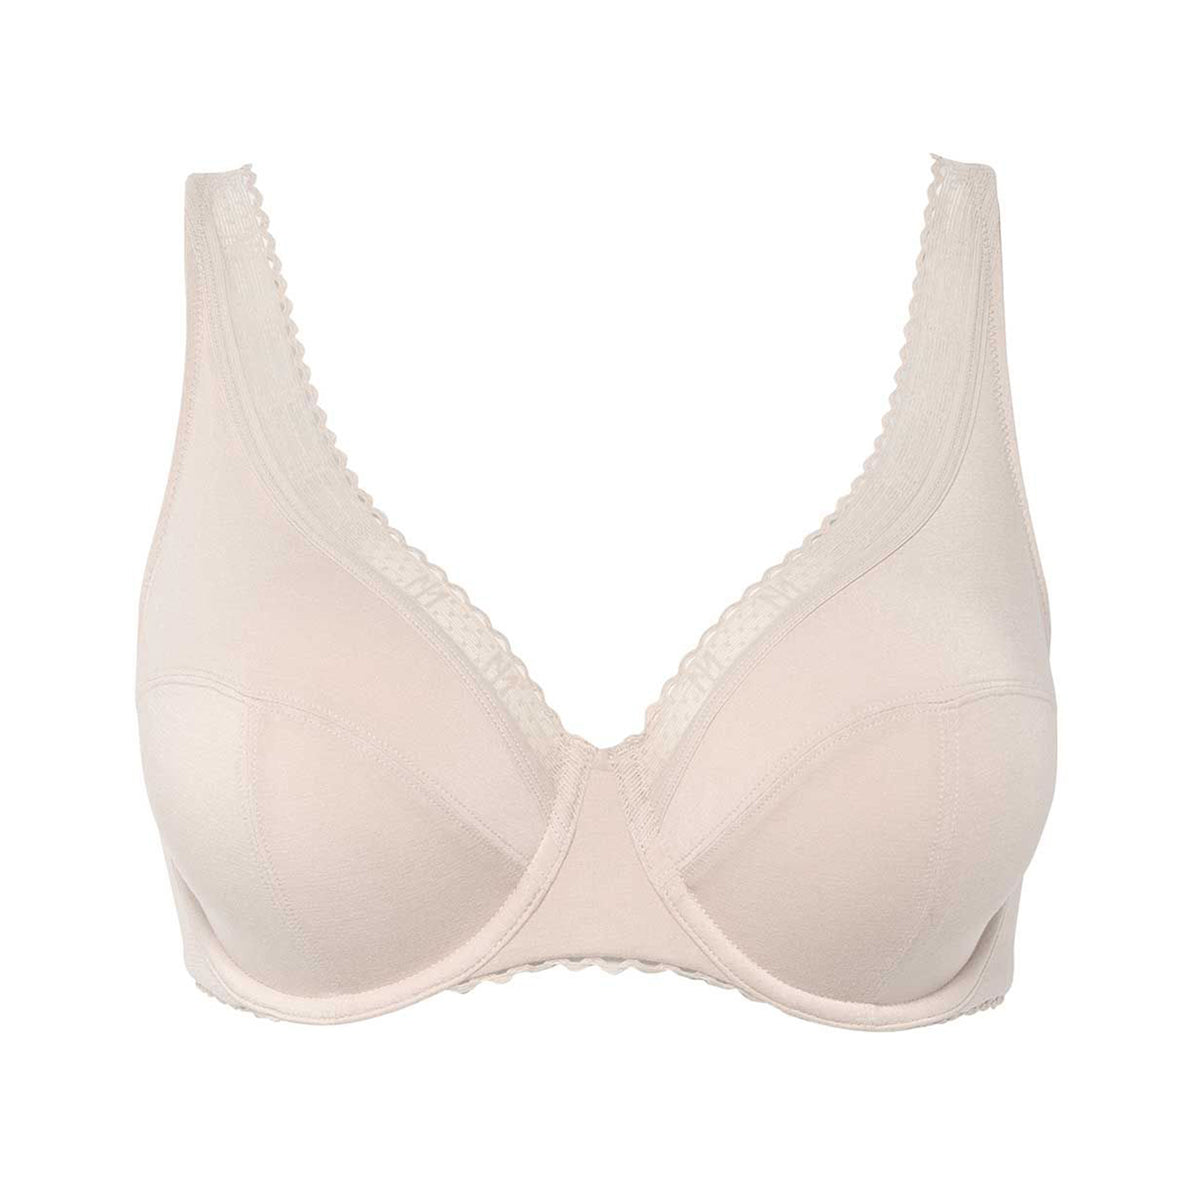 Vanila B Cup Size Seamless and Comfortable for Everyday(Size 40